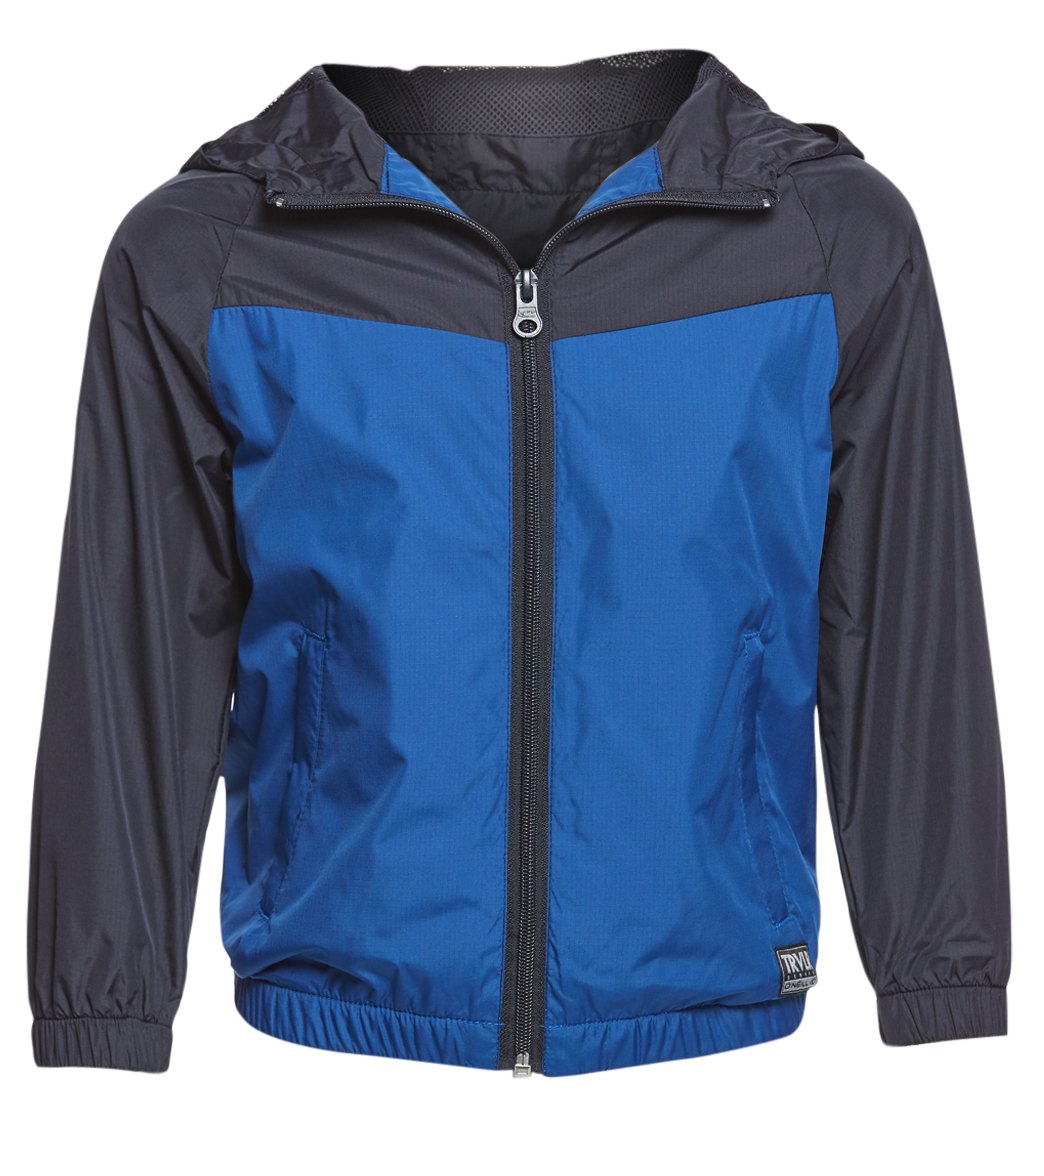 O'neill Boys' Travelers Windbreaker Jacket Toddler - Navy Small 4 Polyester - Swimoutlet.com